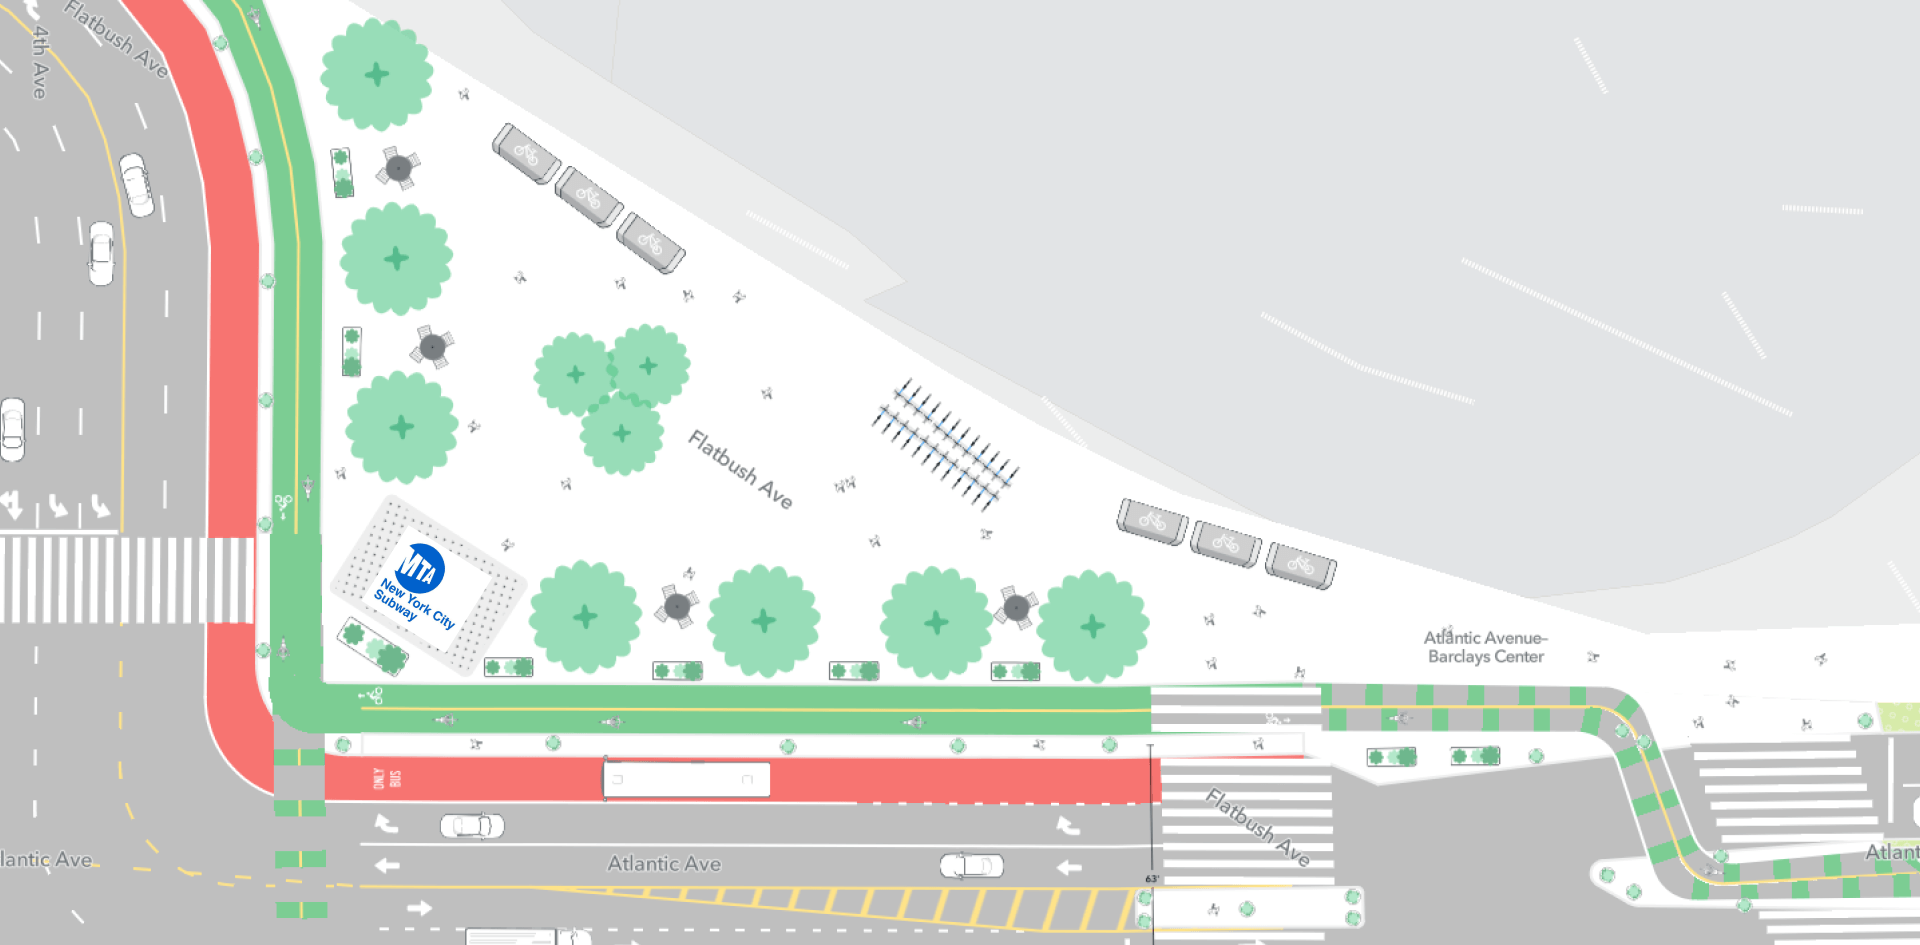 rendering of atlantic and flatbush ave with bus and bike lanes